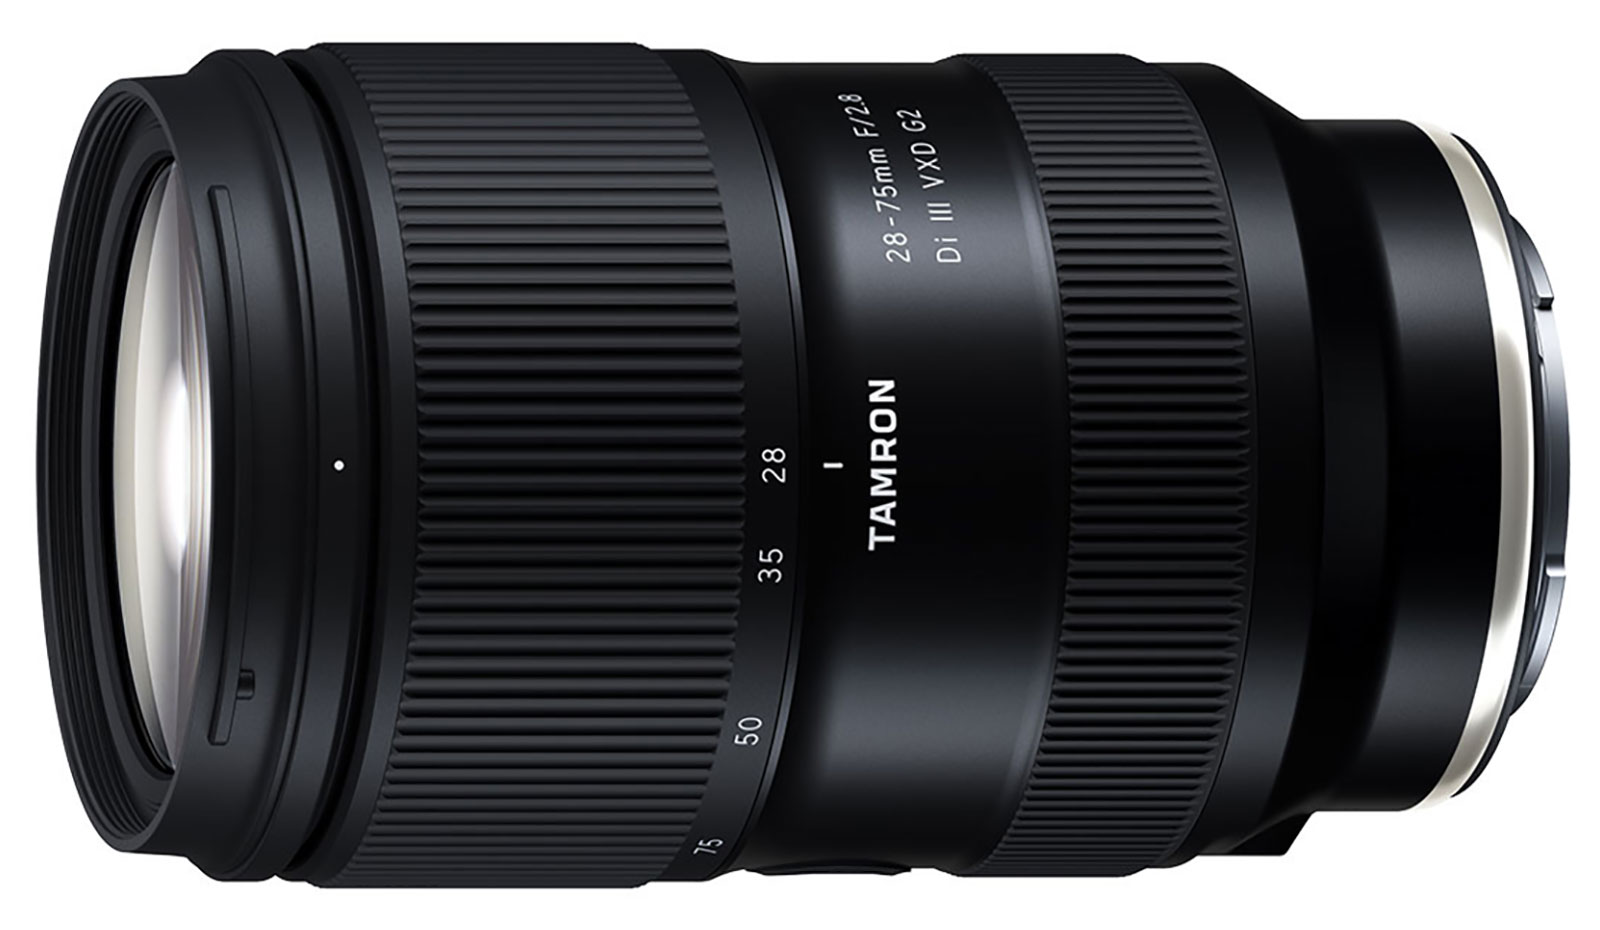 Tamron Announces Development of FE 35-150mm f/2-2.8 & Updated FE 28